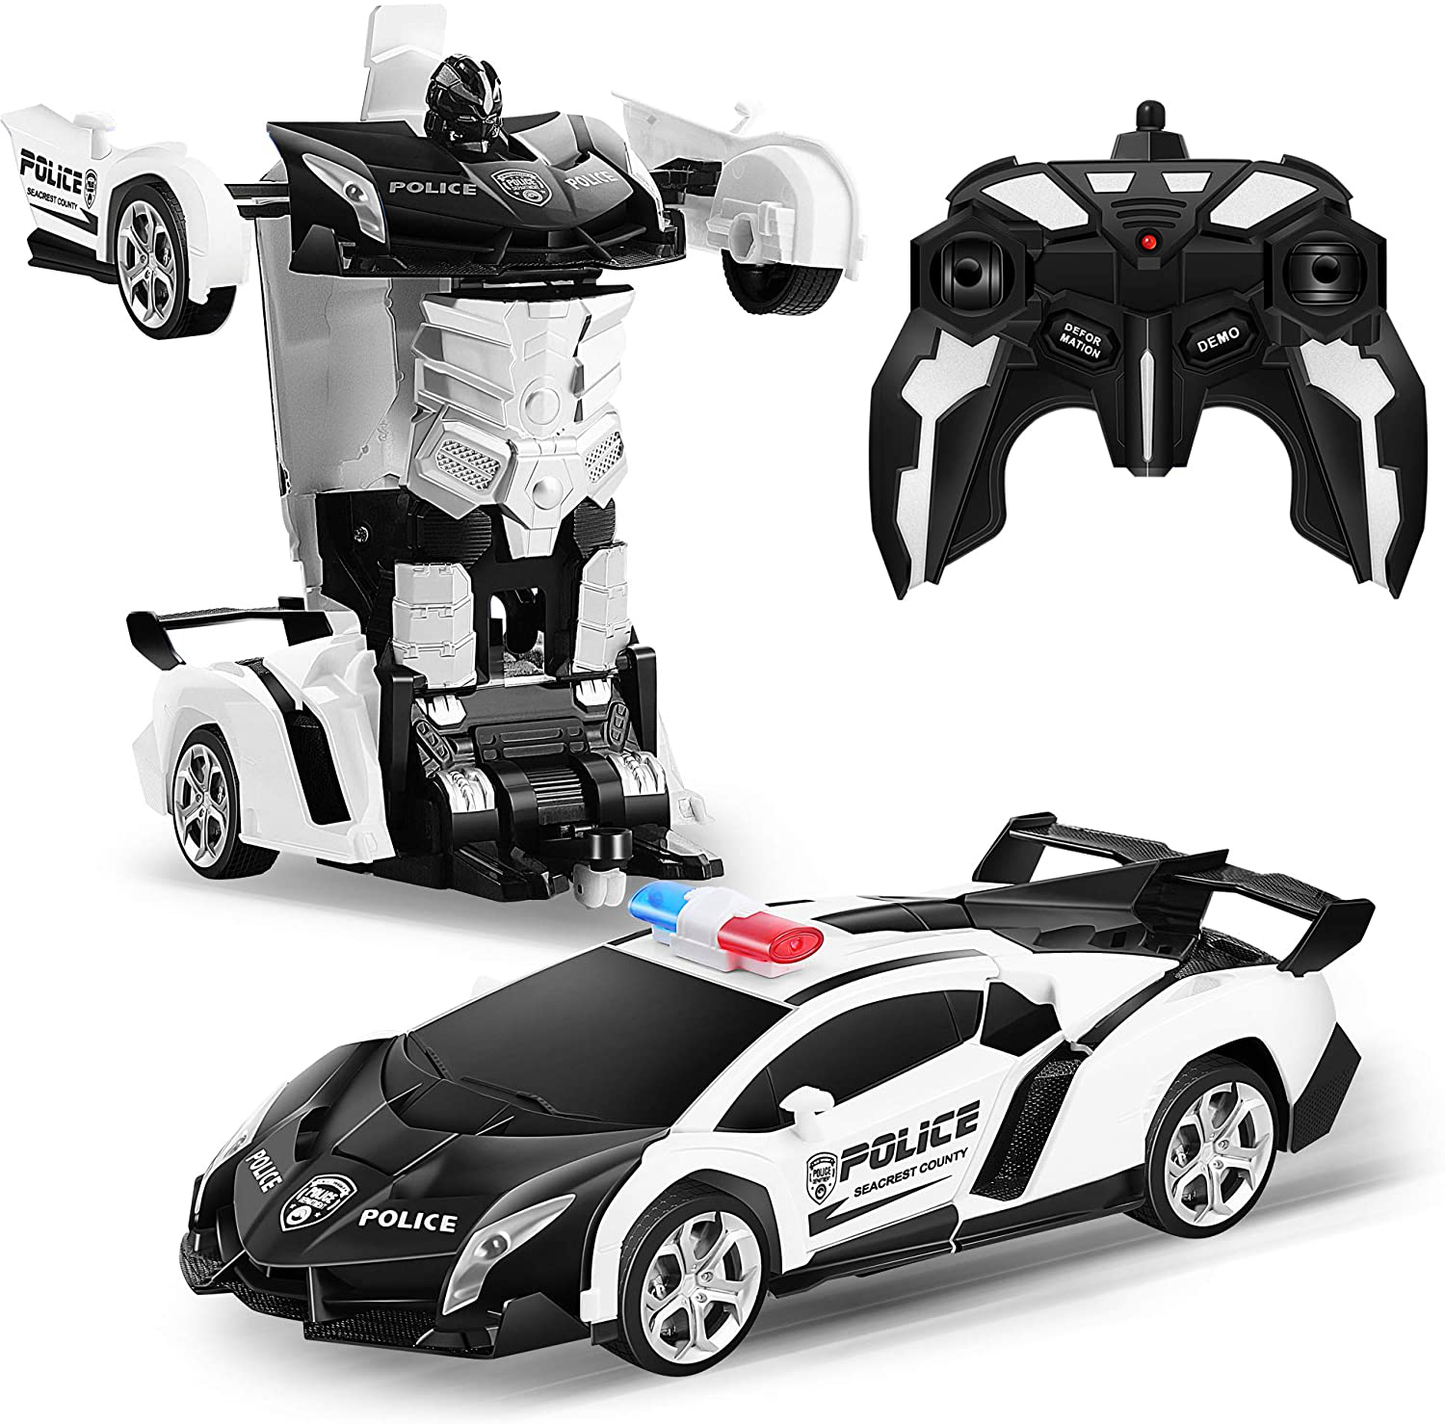 FIGROL Transform RC Car Robot, Remote Control Car Independent 2.4G Robot Deformation Car Toy with One Button Transformation & 360 Rotation 1:18 Scale